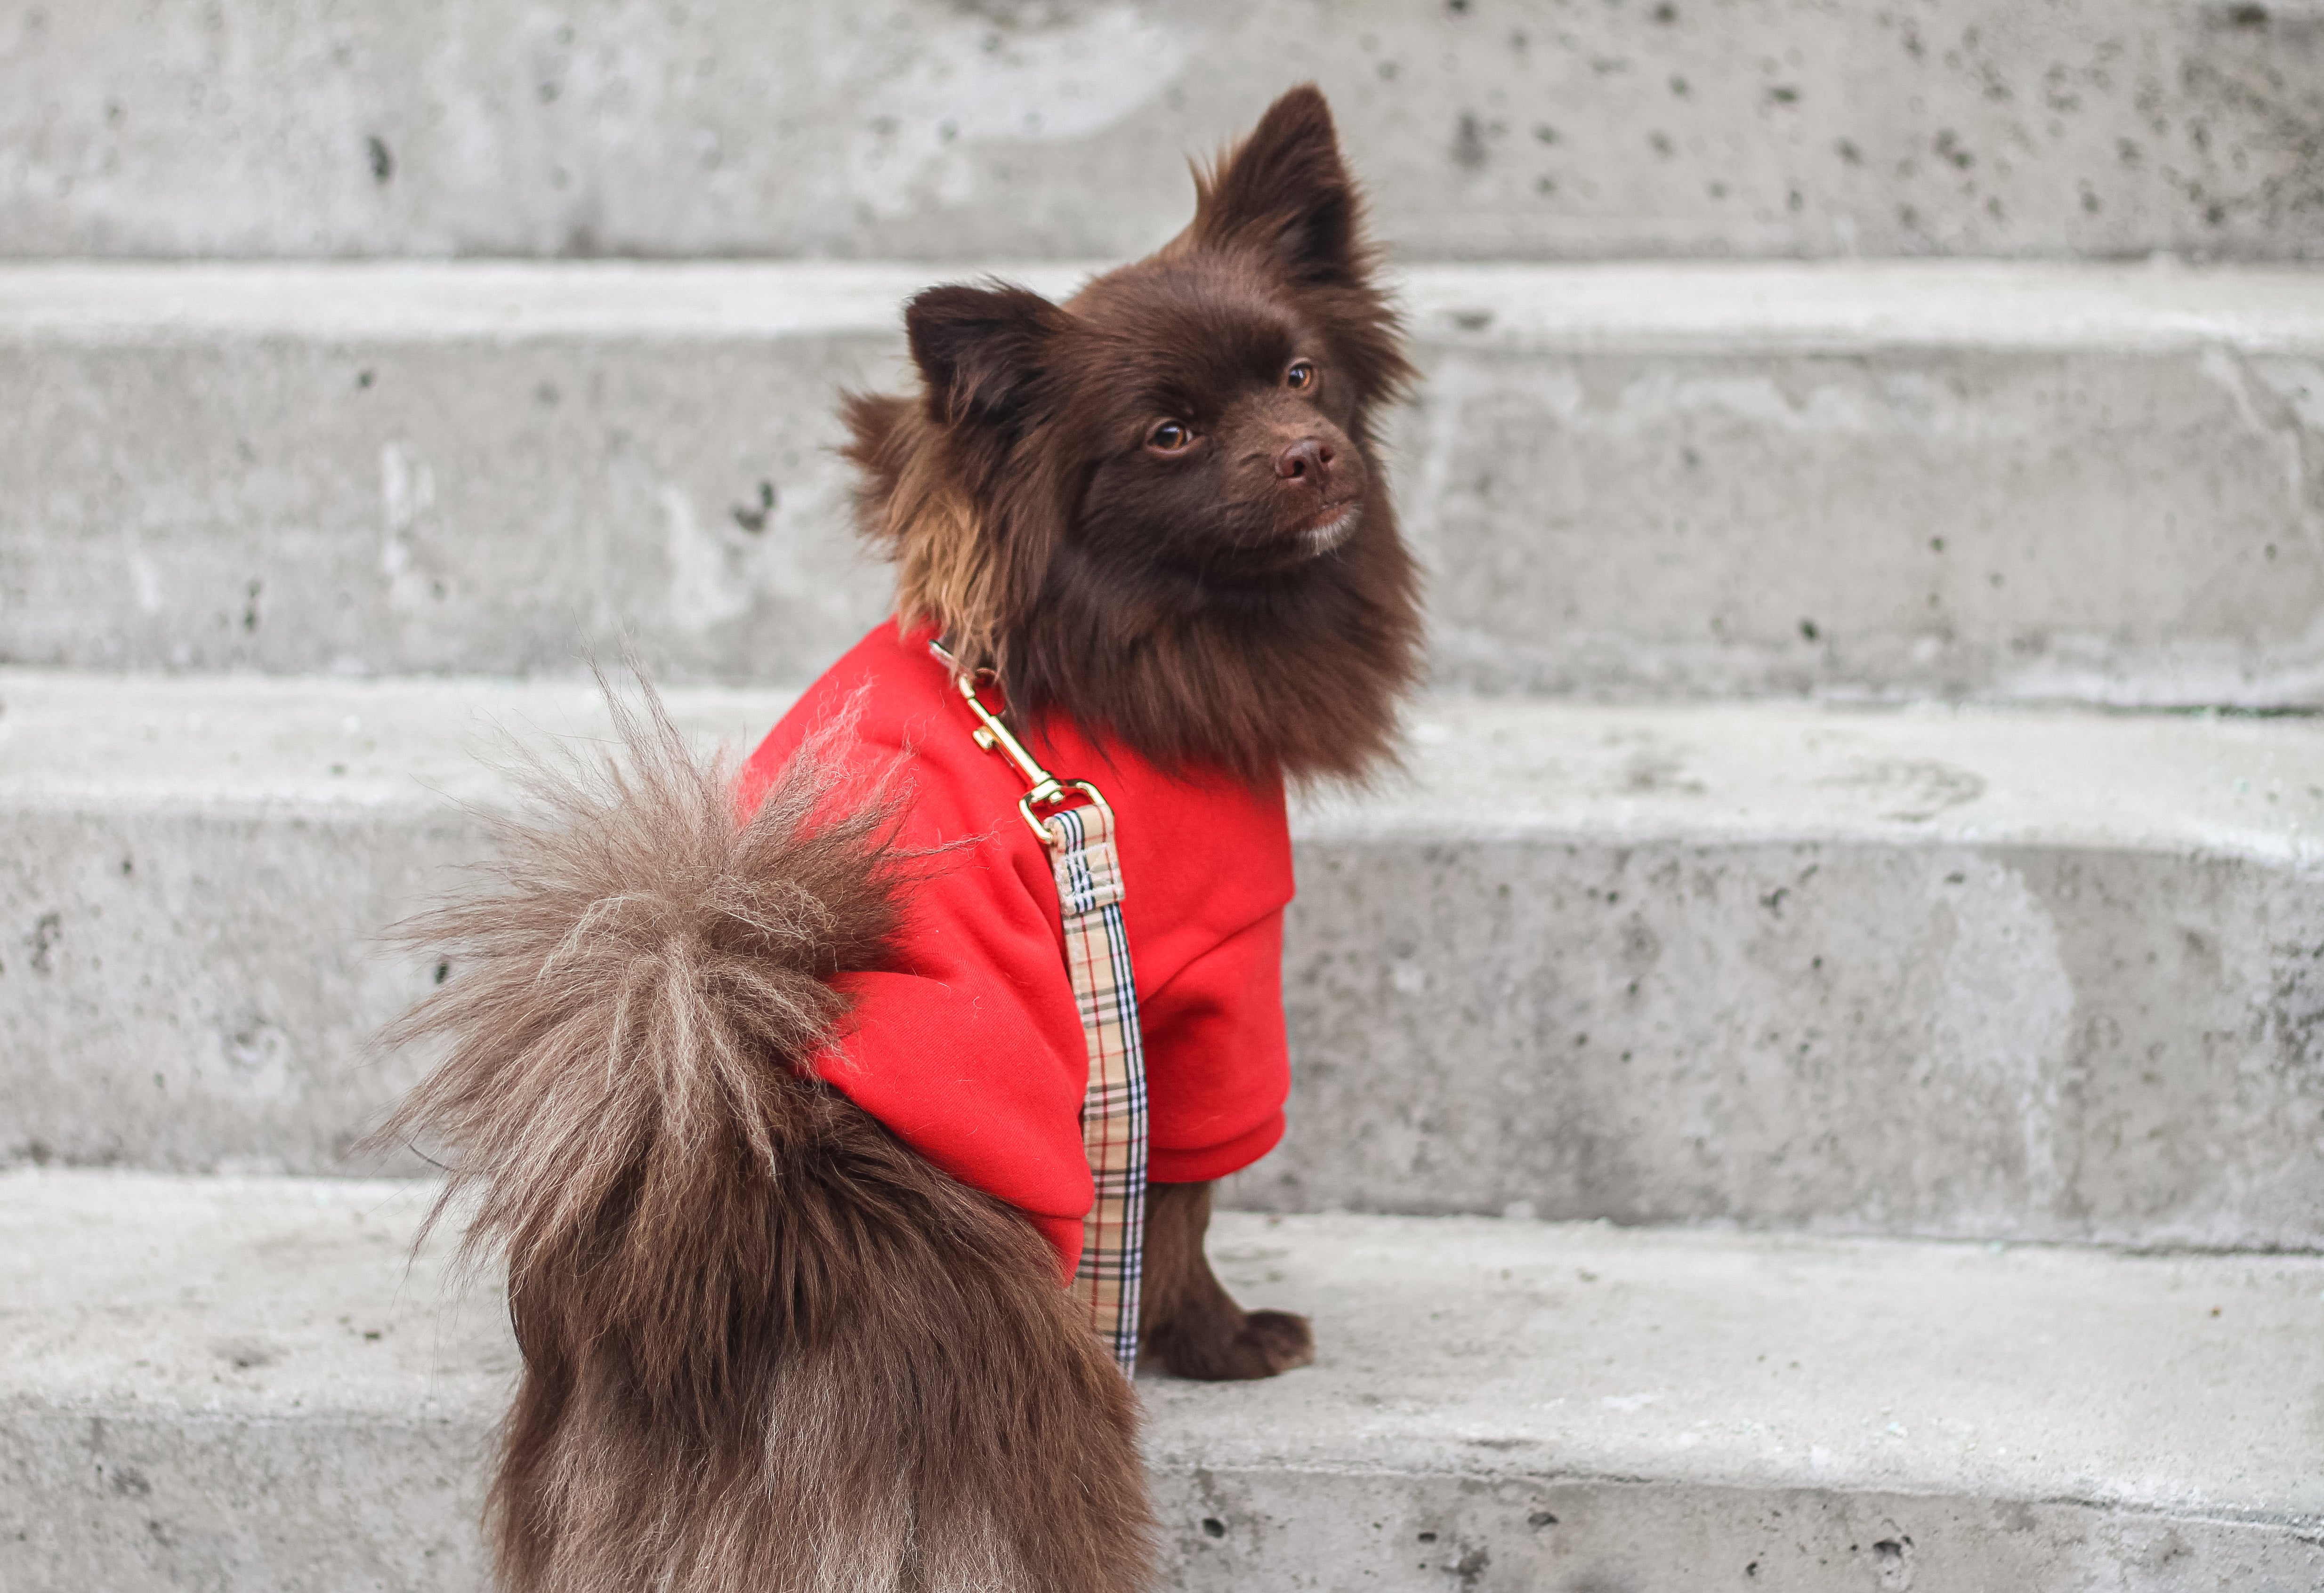 The plain red dog sweater